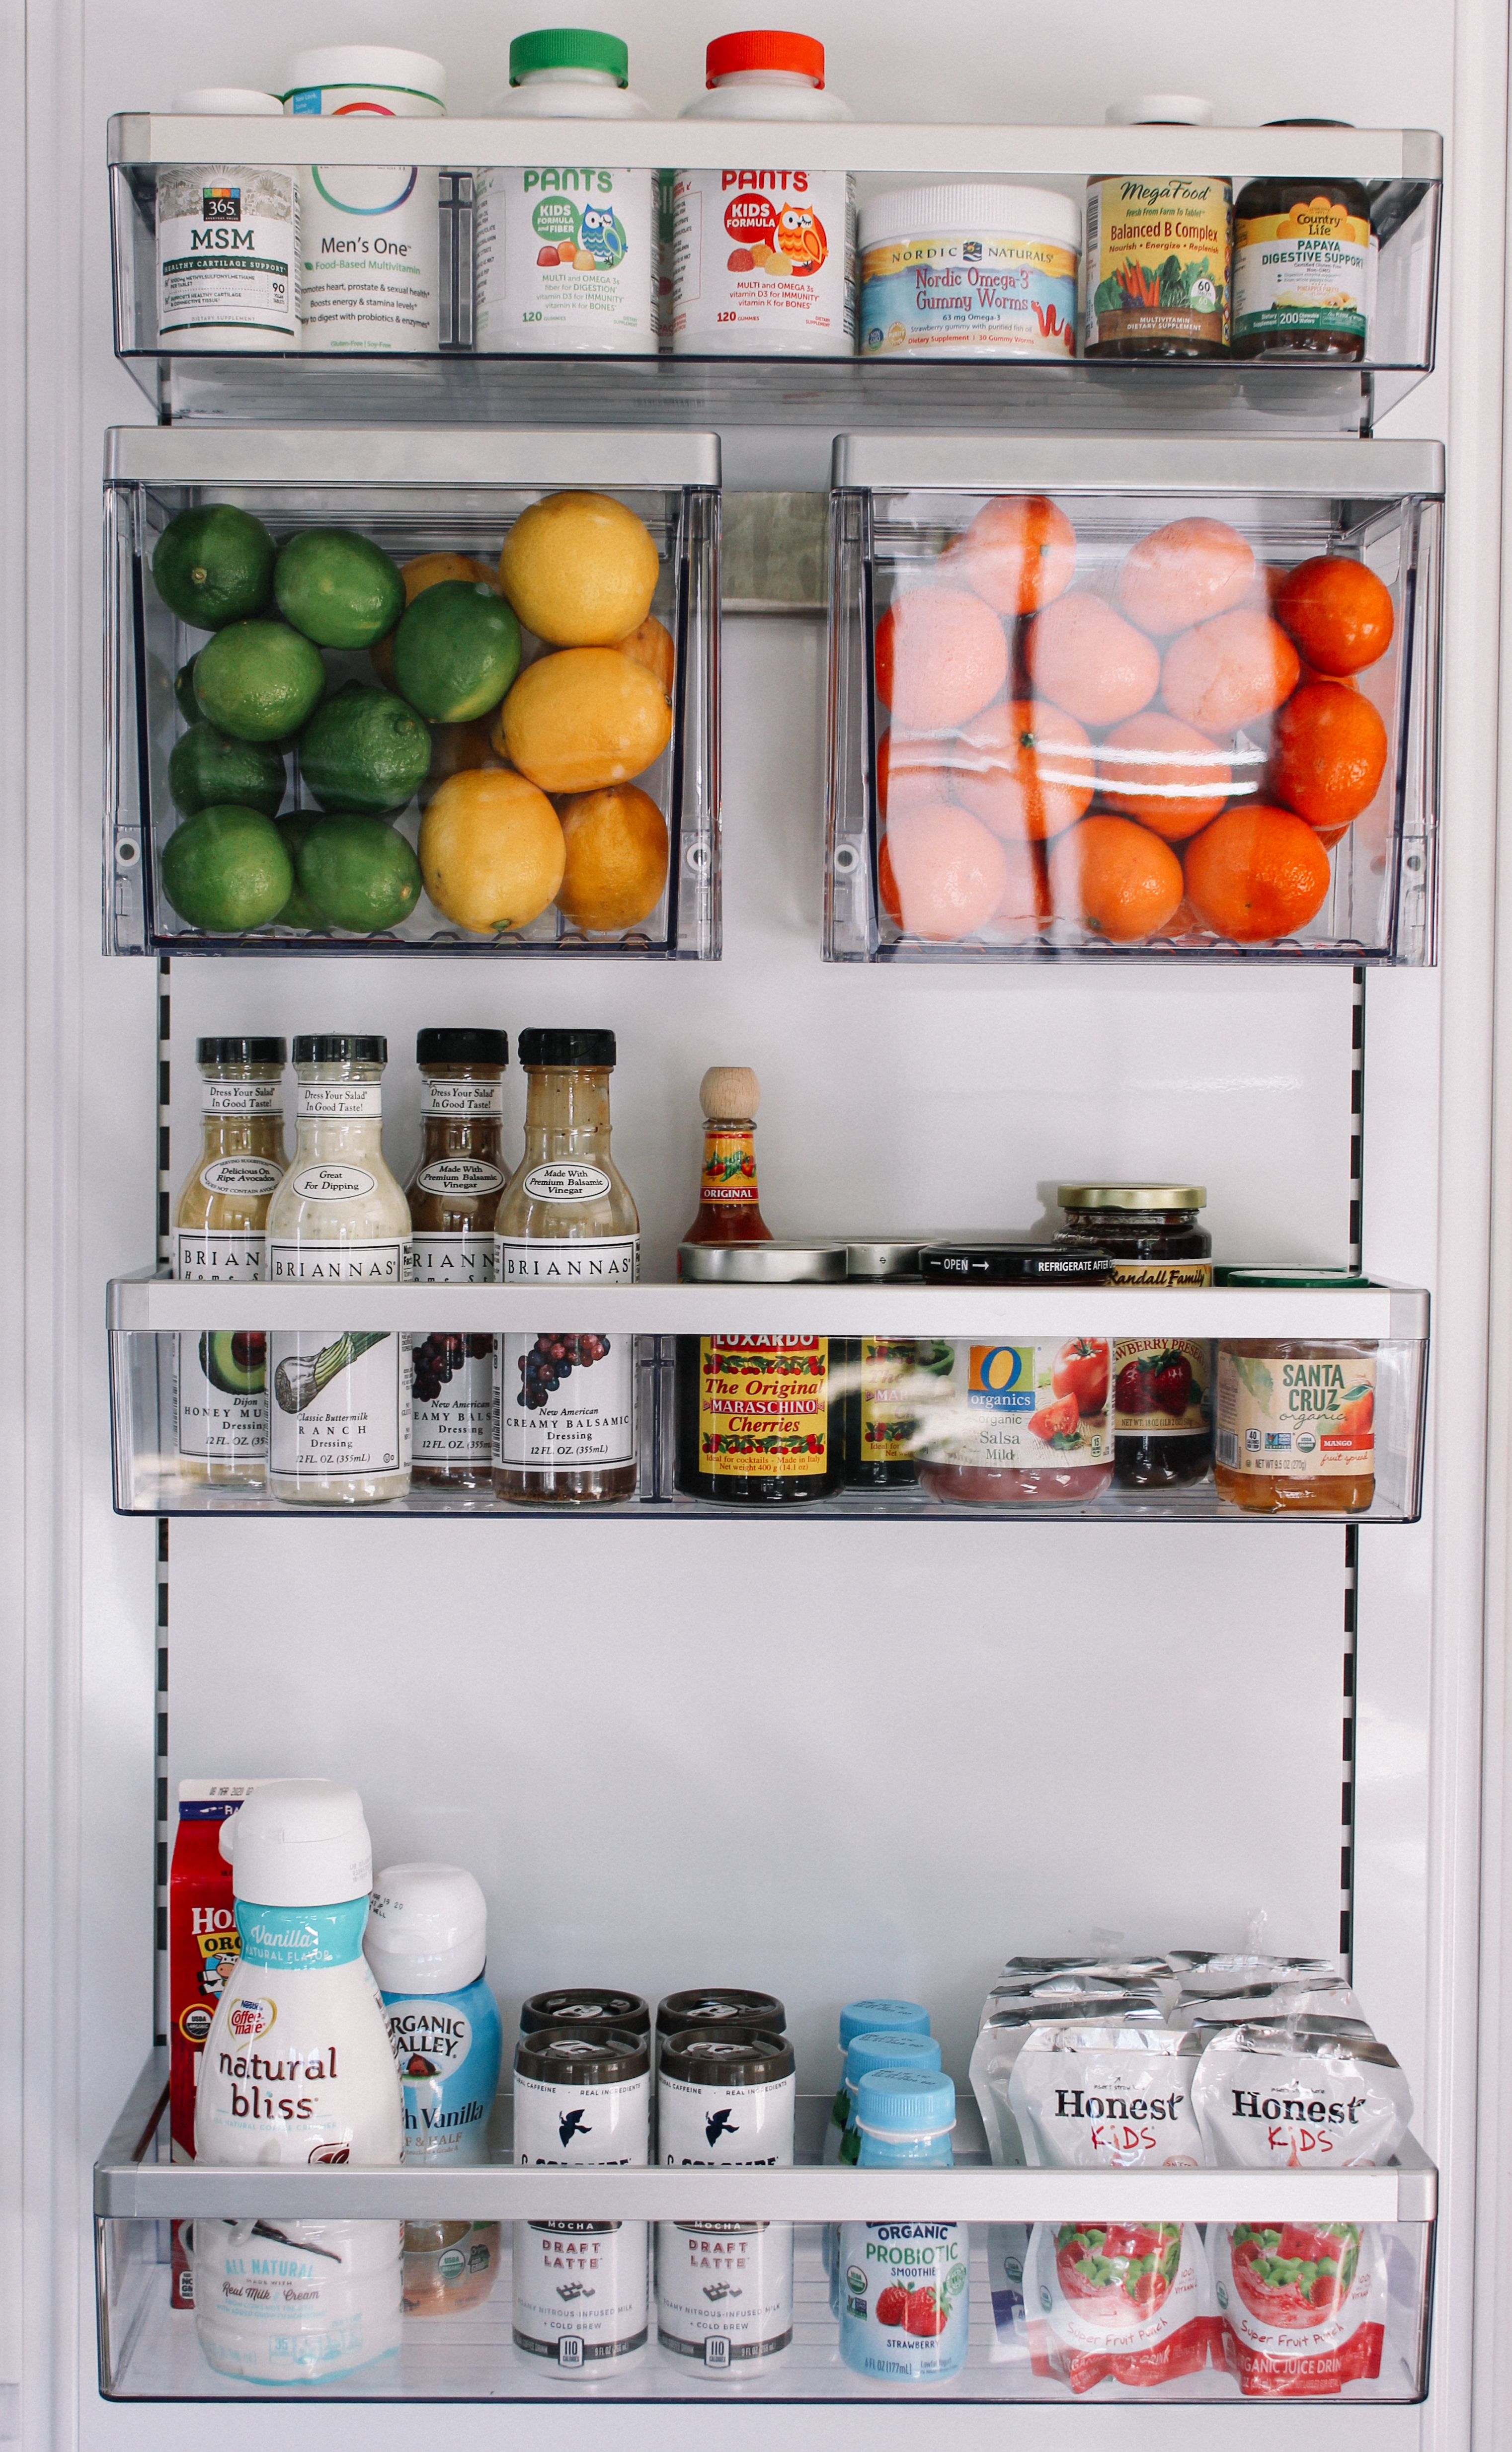 Honeybee Home // How We Organize Our Fridge - Andee Layne  Small fridge  organization, Fridge organization, Kitchen organization pantry